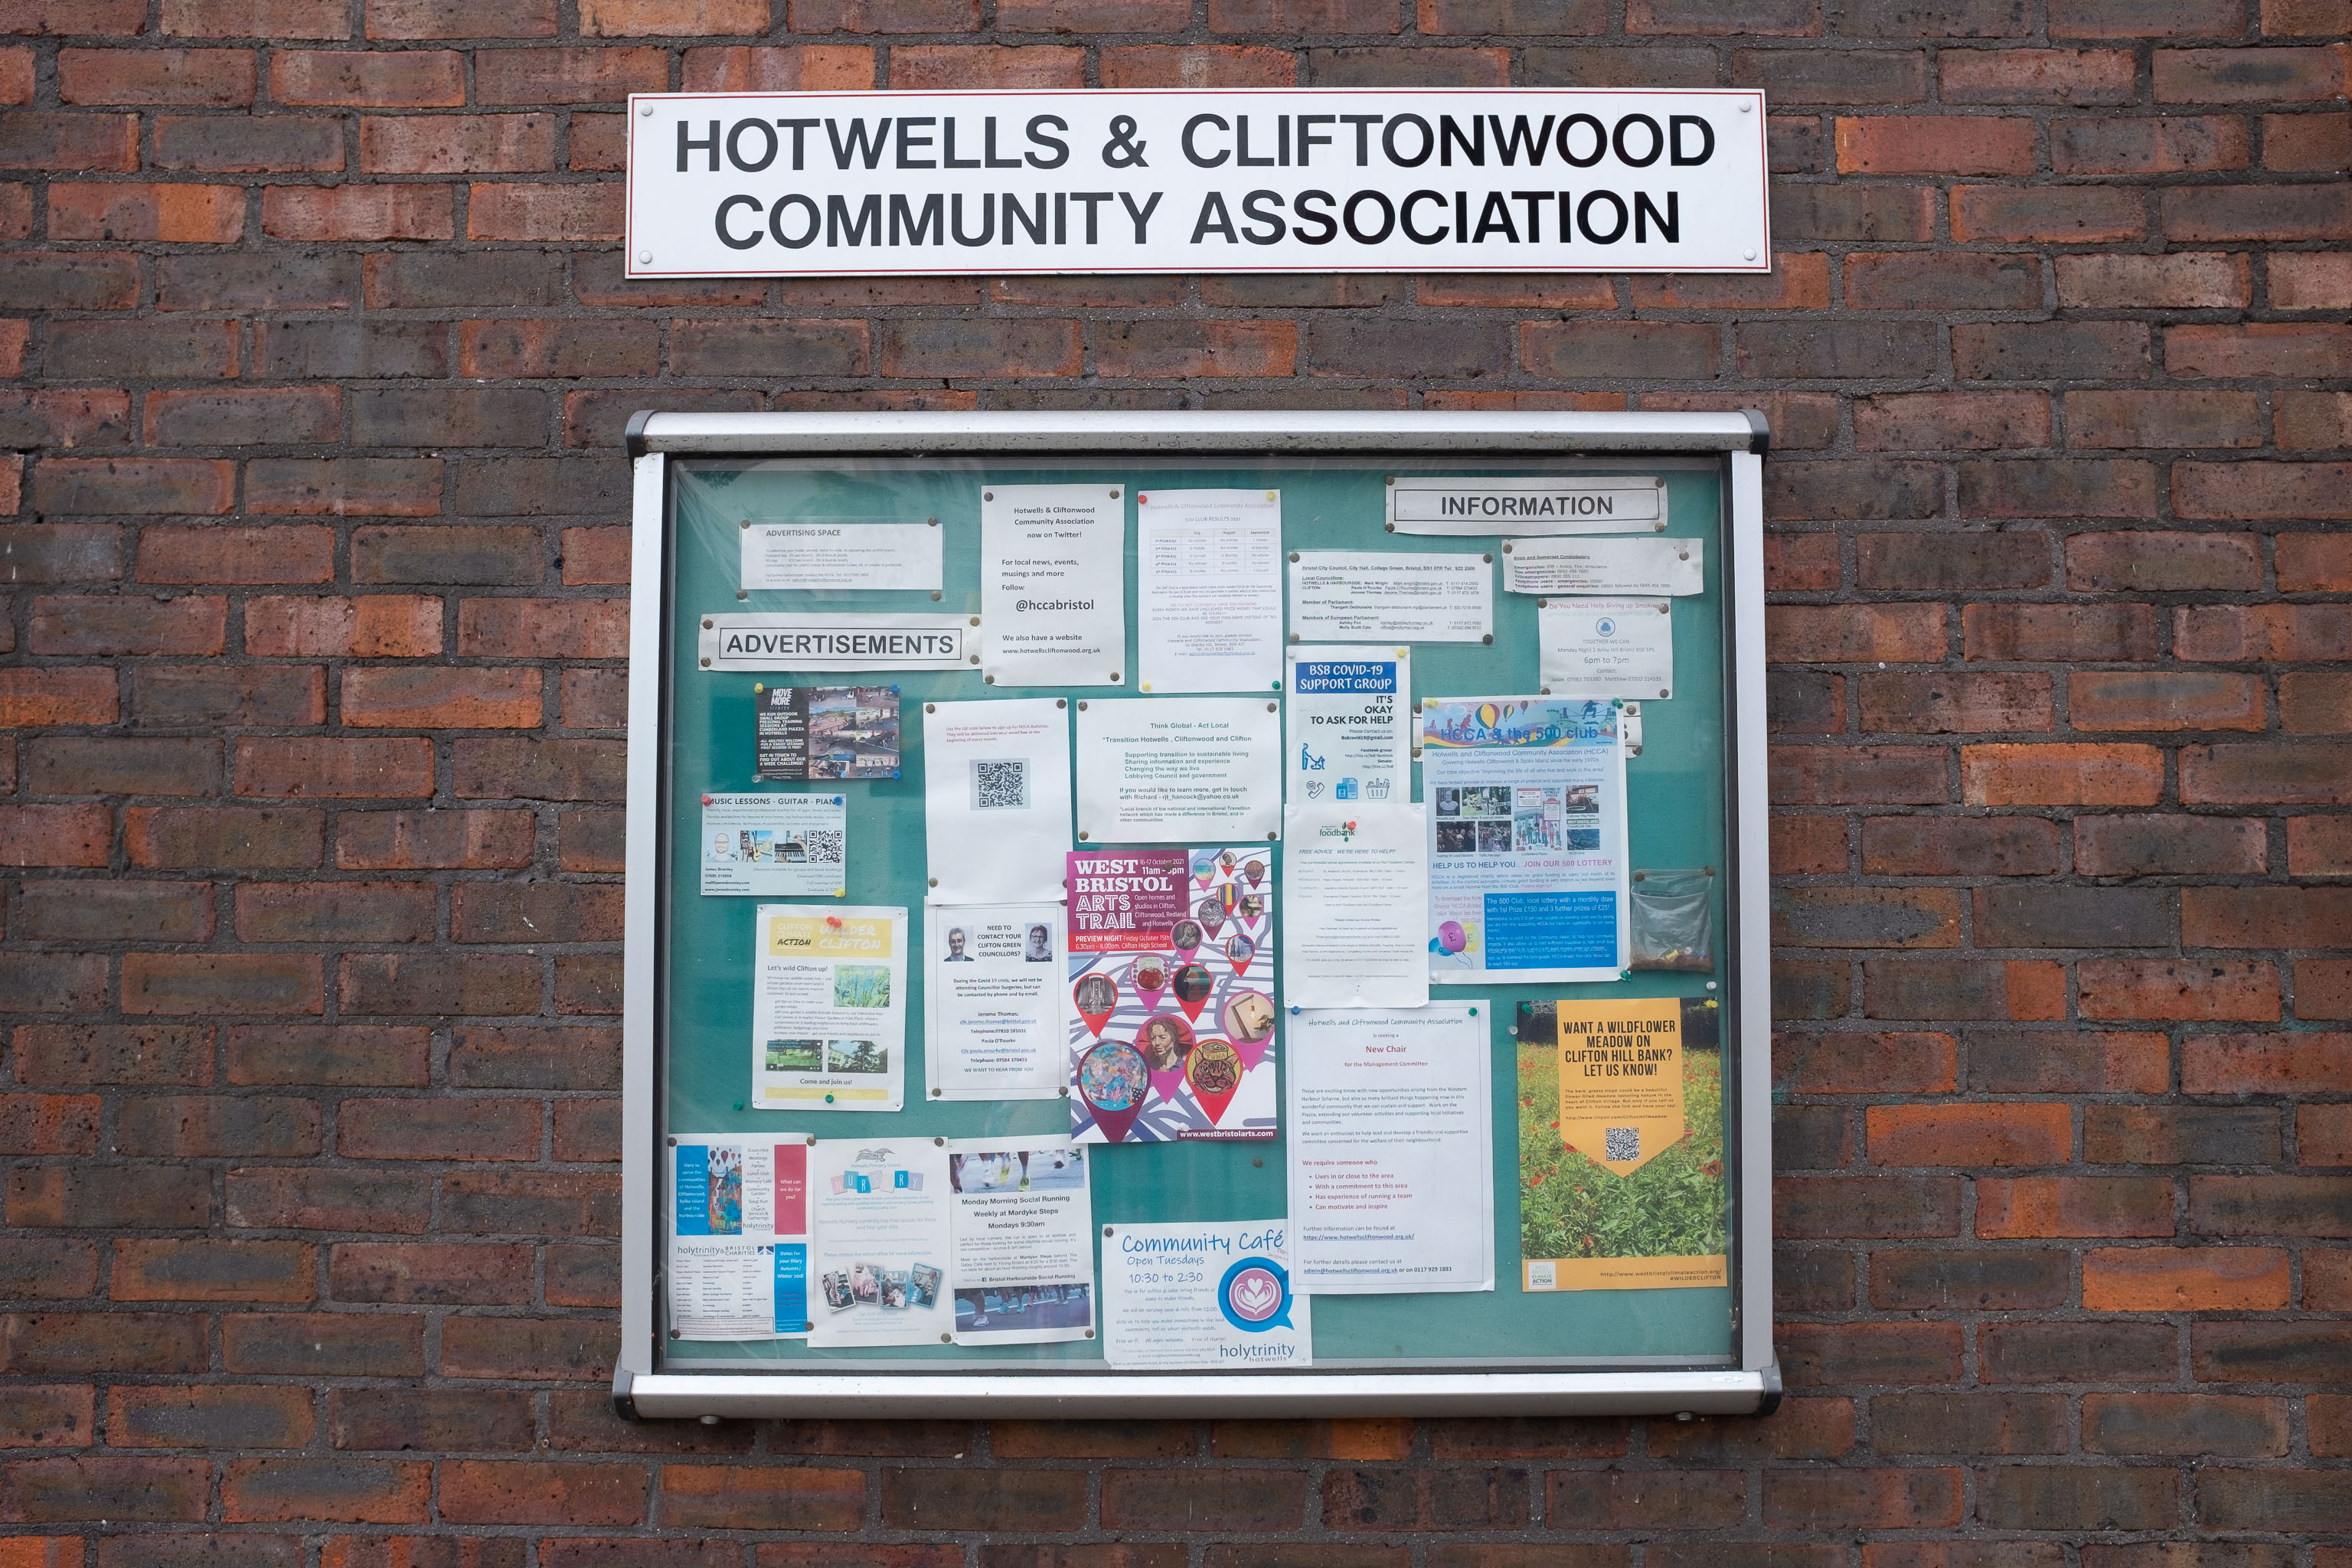 Community
The sign about the wildflower meadow on Clifton Hill Bank is part of the consultation I mentioned the other day.
